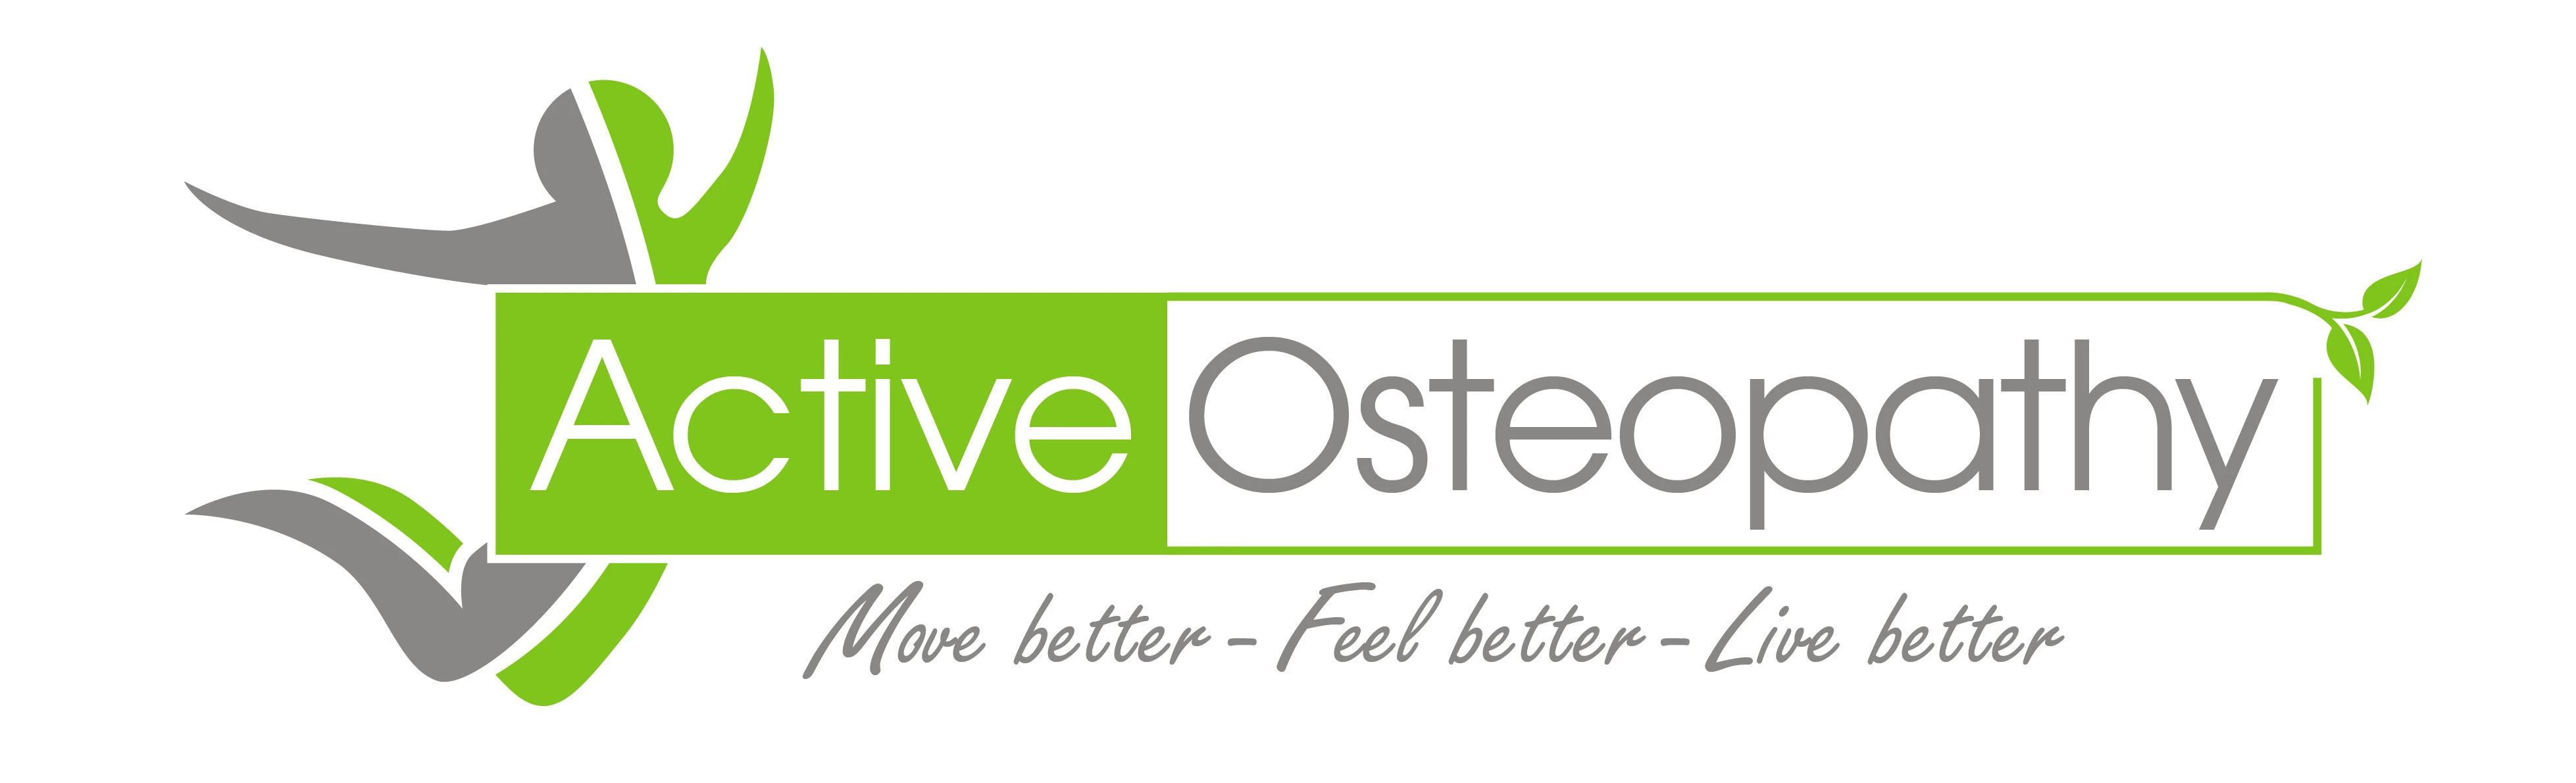 Active Osteopathy